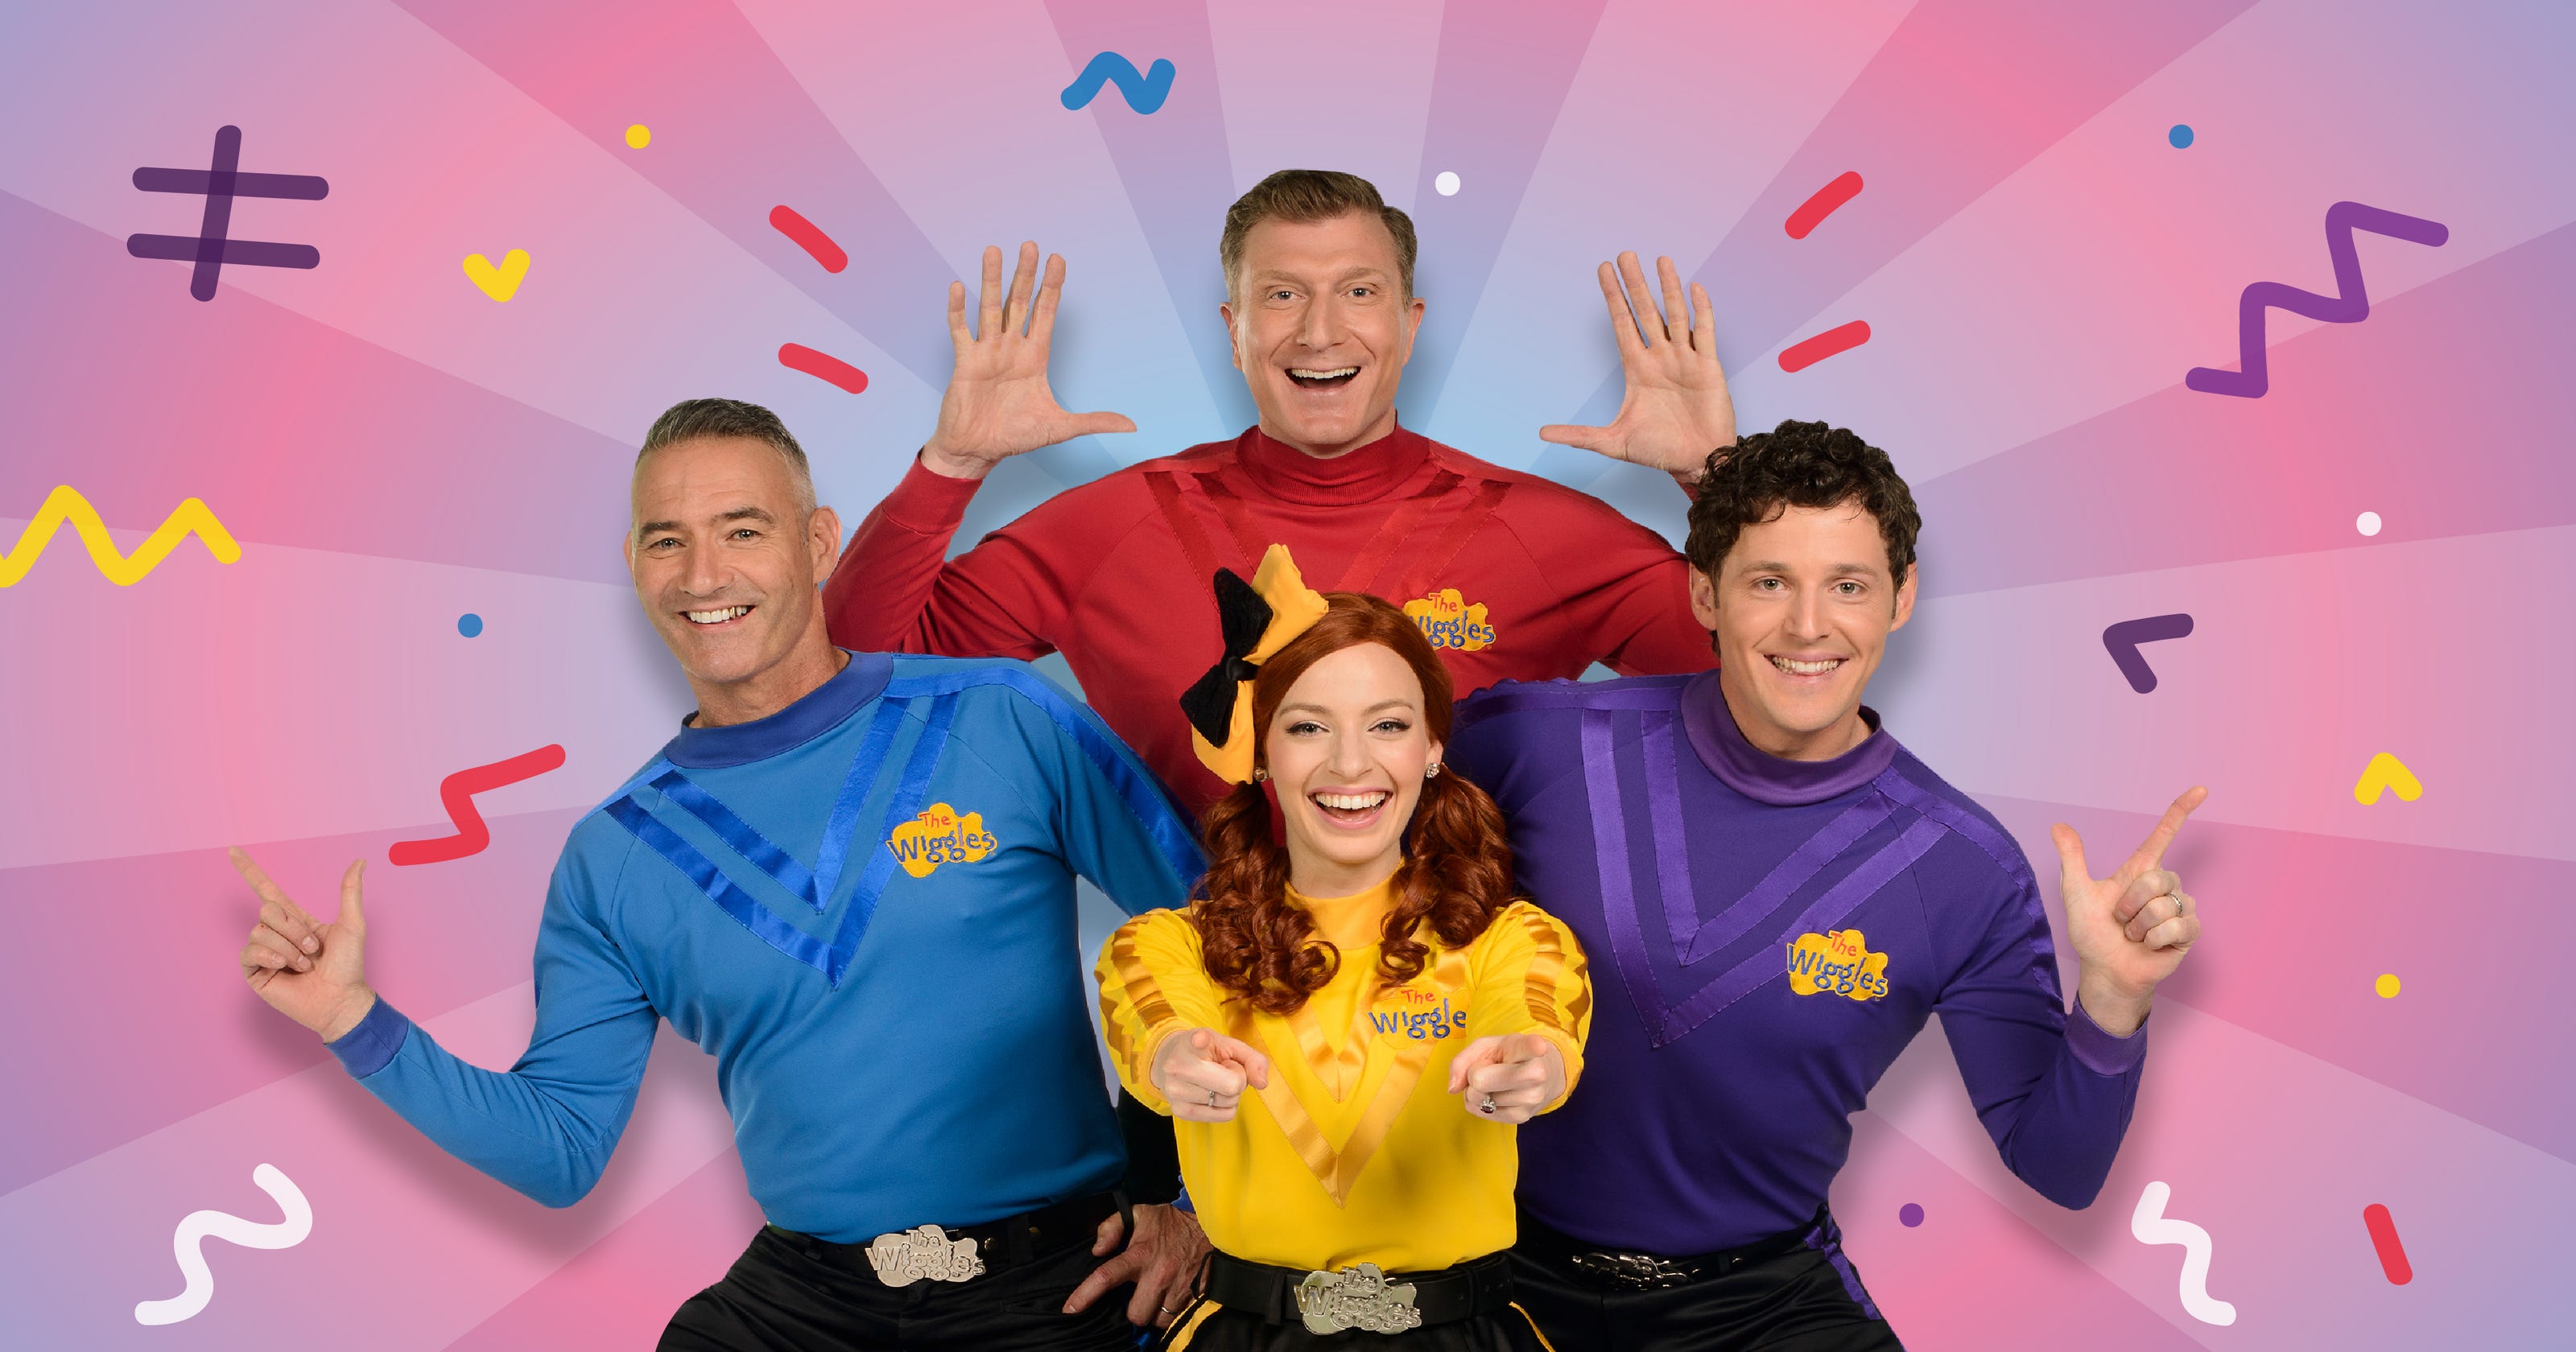 'The Wiggles' tour schedule is set for the United States